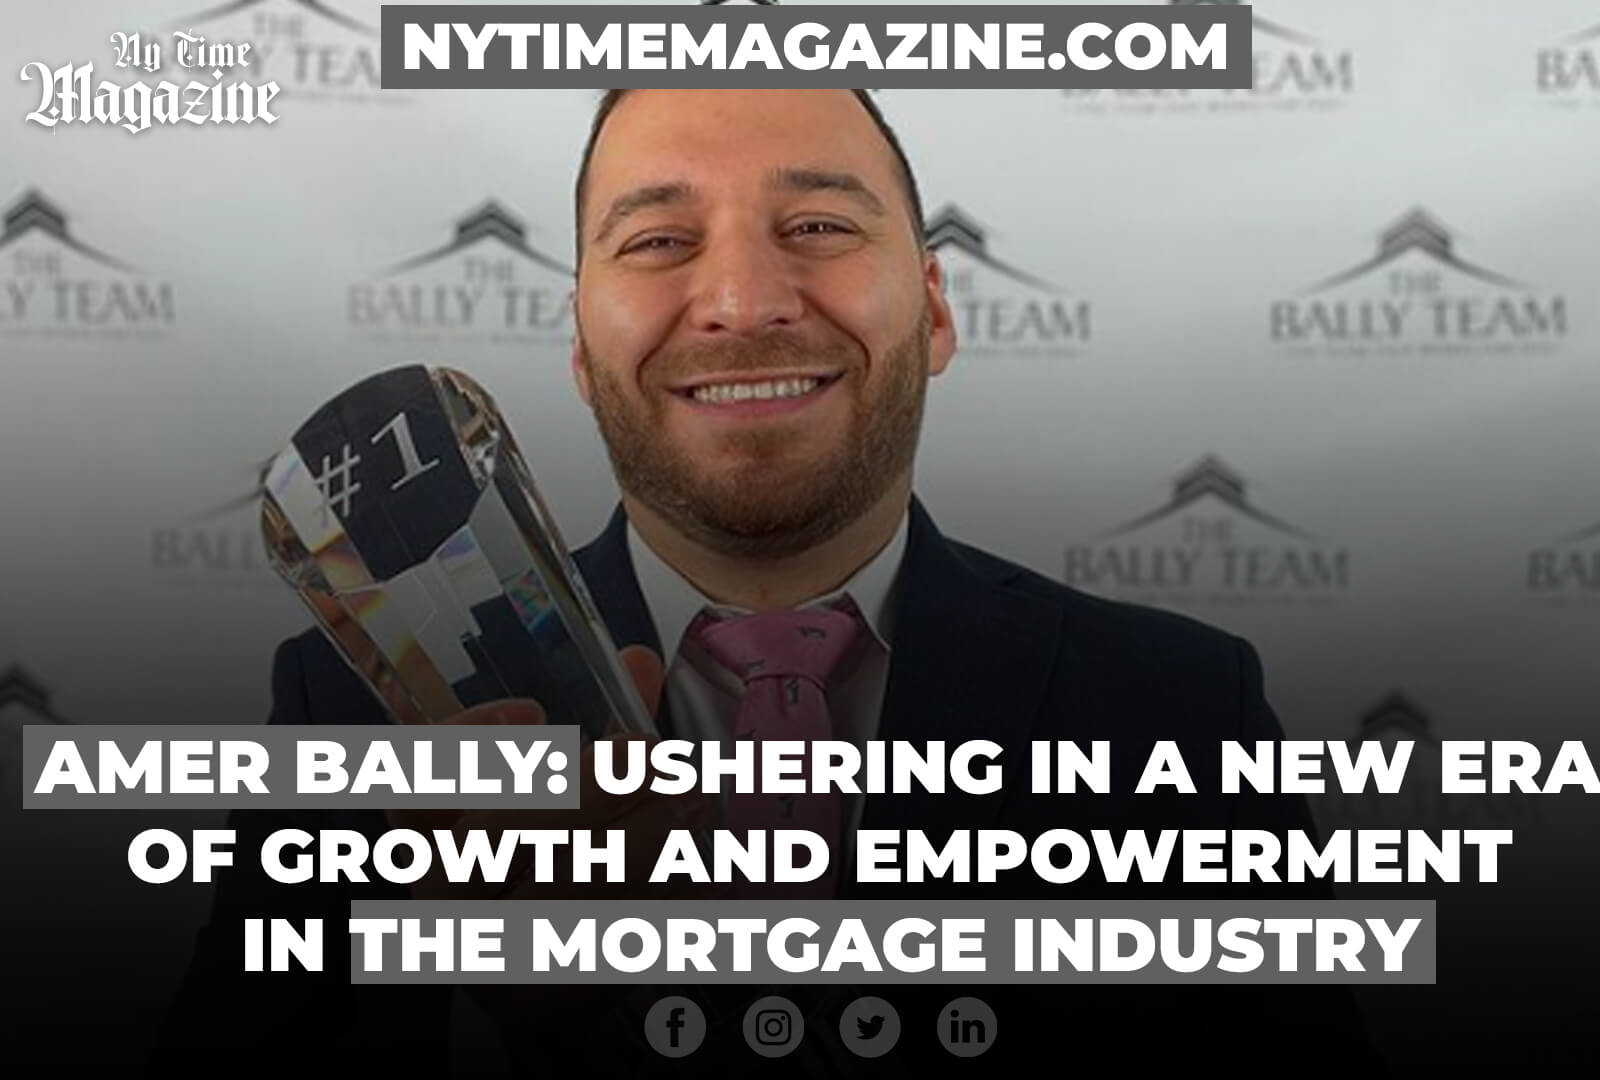 AMER BALLY: USHERING IN A NEW ERA OF GROWTH AND EMPOWERMENT IN THE MORTGAGE INDUSTRY